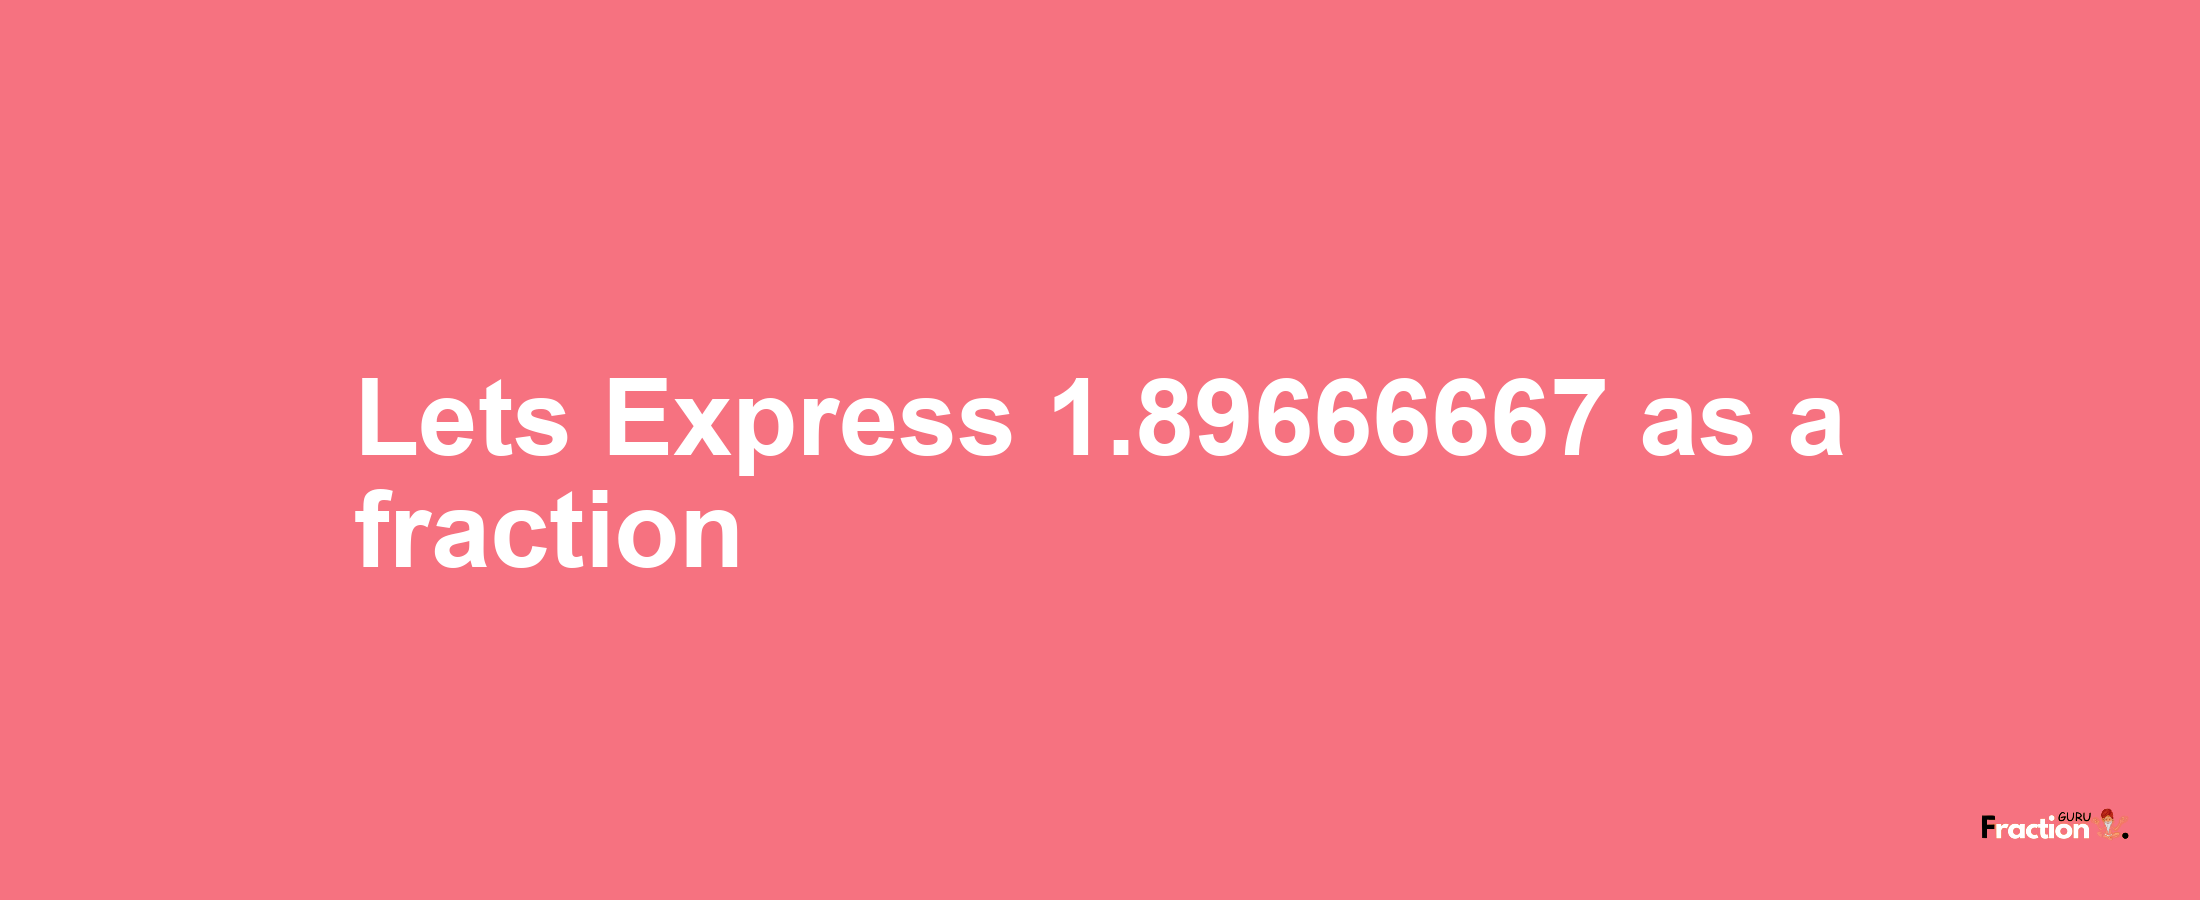 Lets Express 1.89666667 as afraction